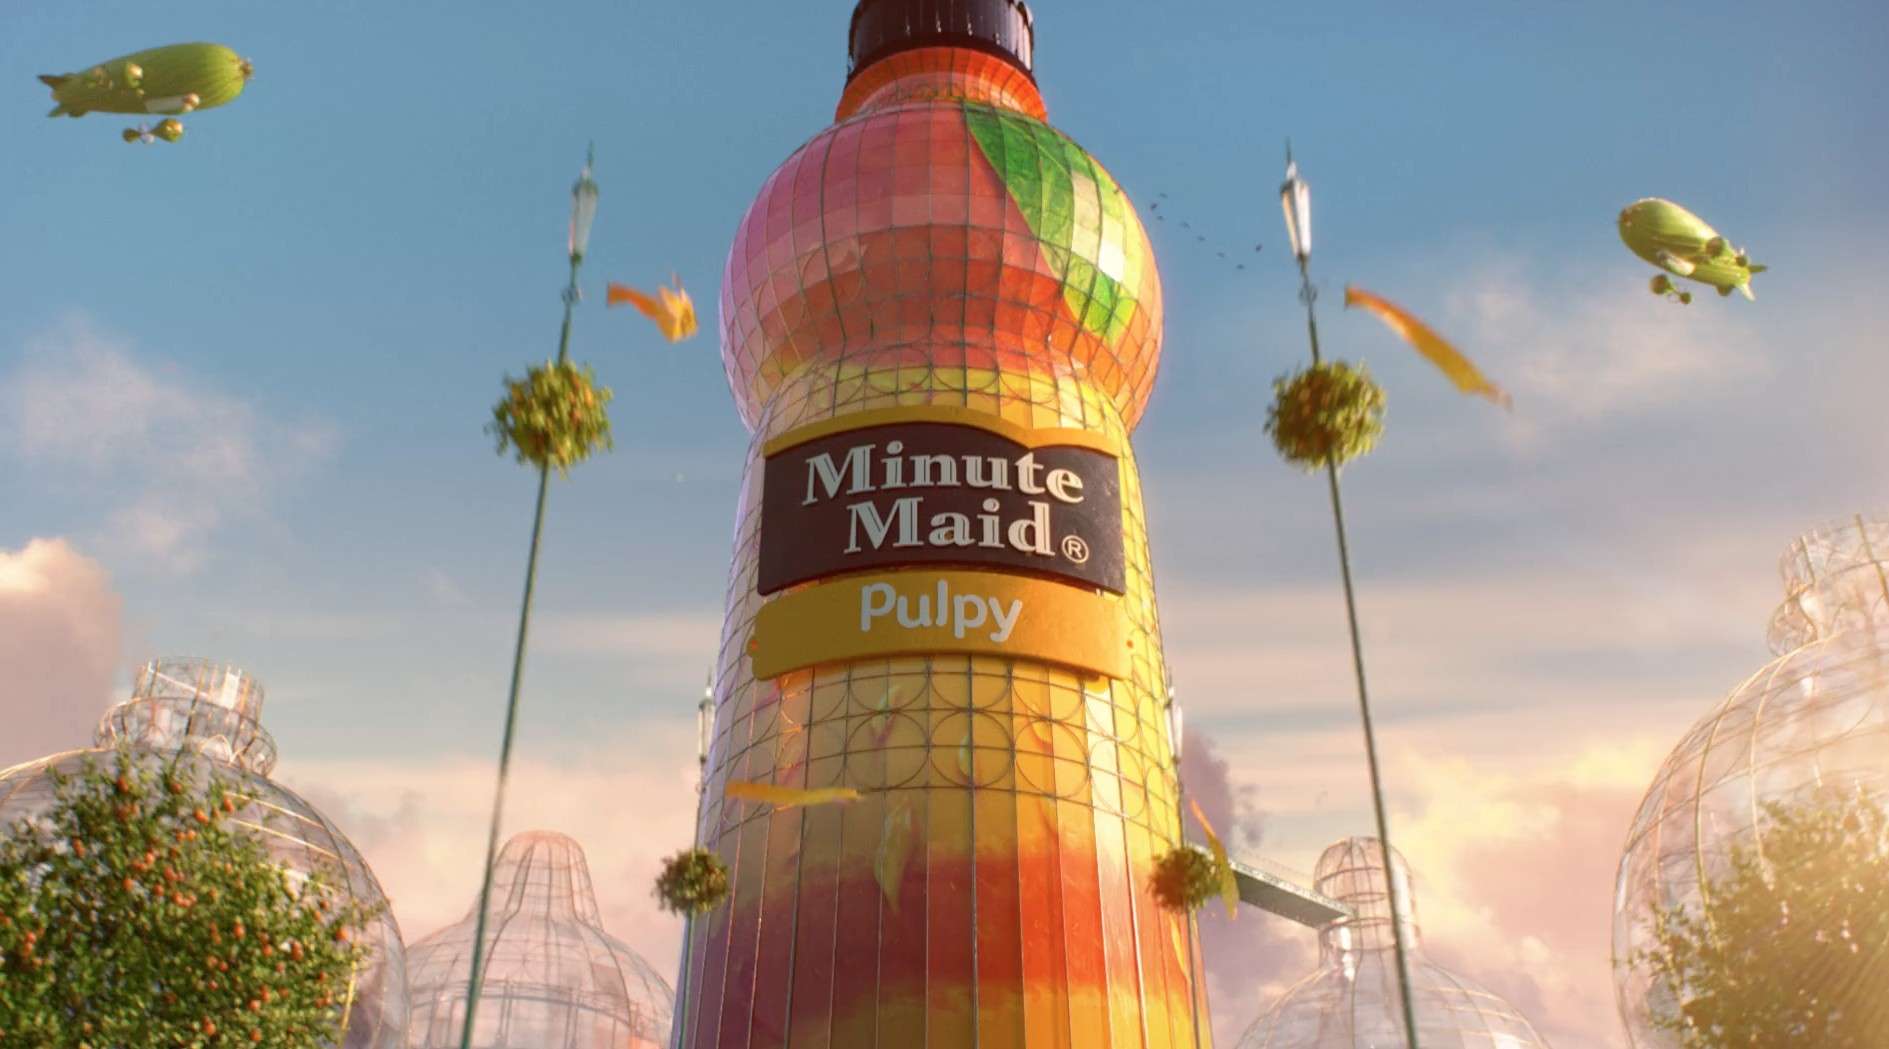 Minute Maid Pulpy Factory